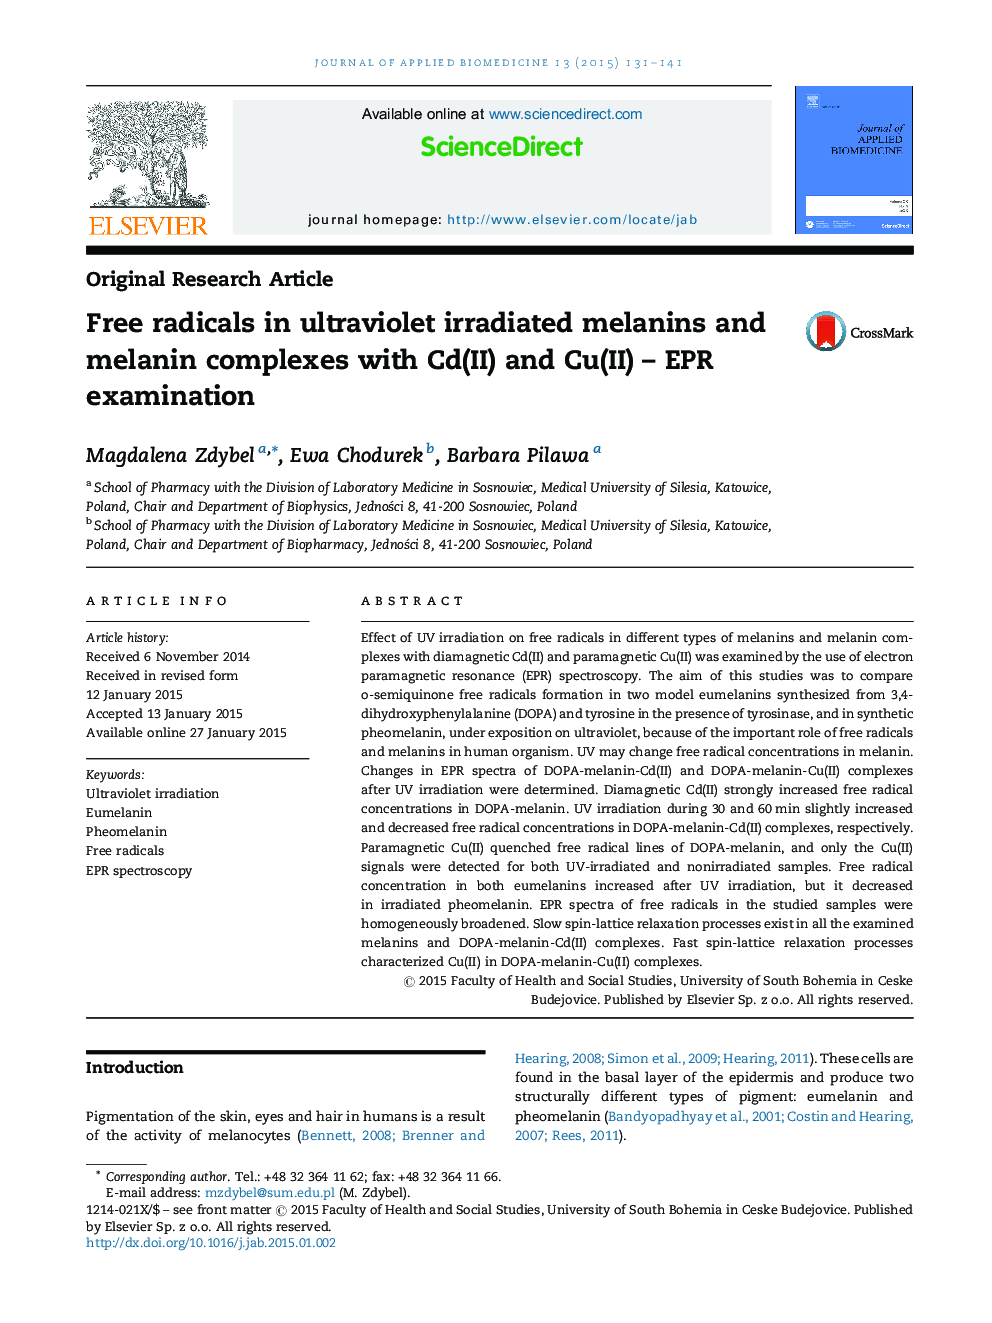 Free radicals in ultraviolet irradiated melanins and melanin complexes with Cd(II) and Cu(II) – EPR examination